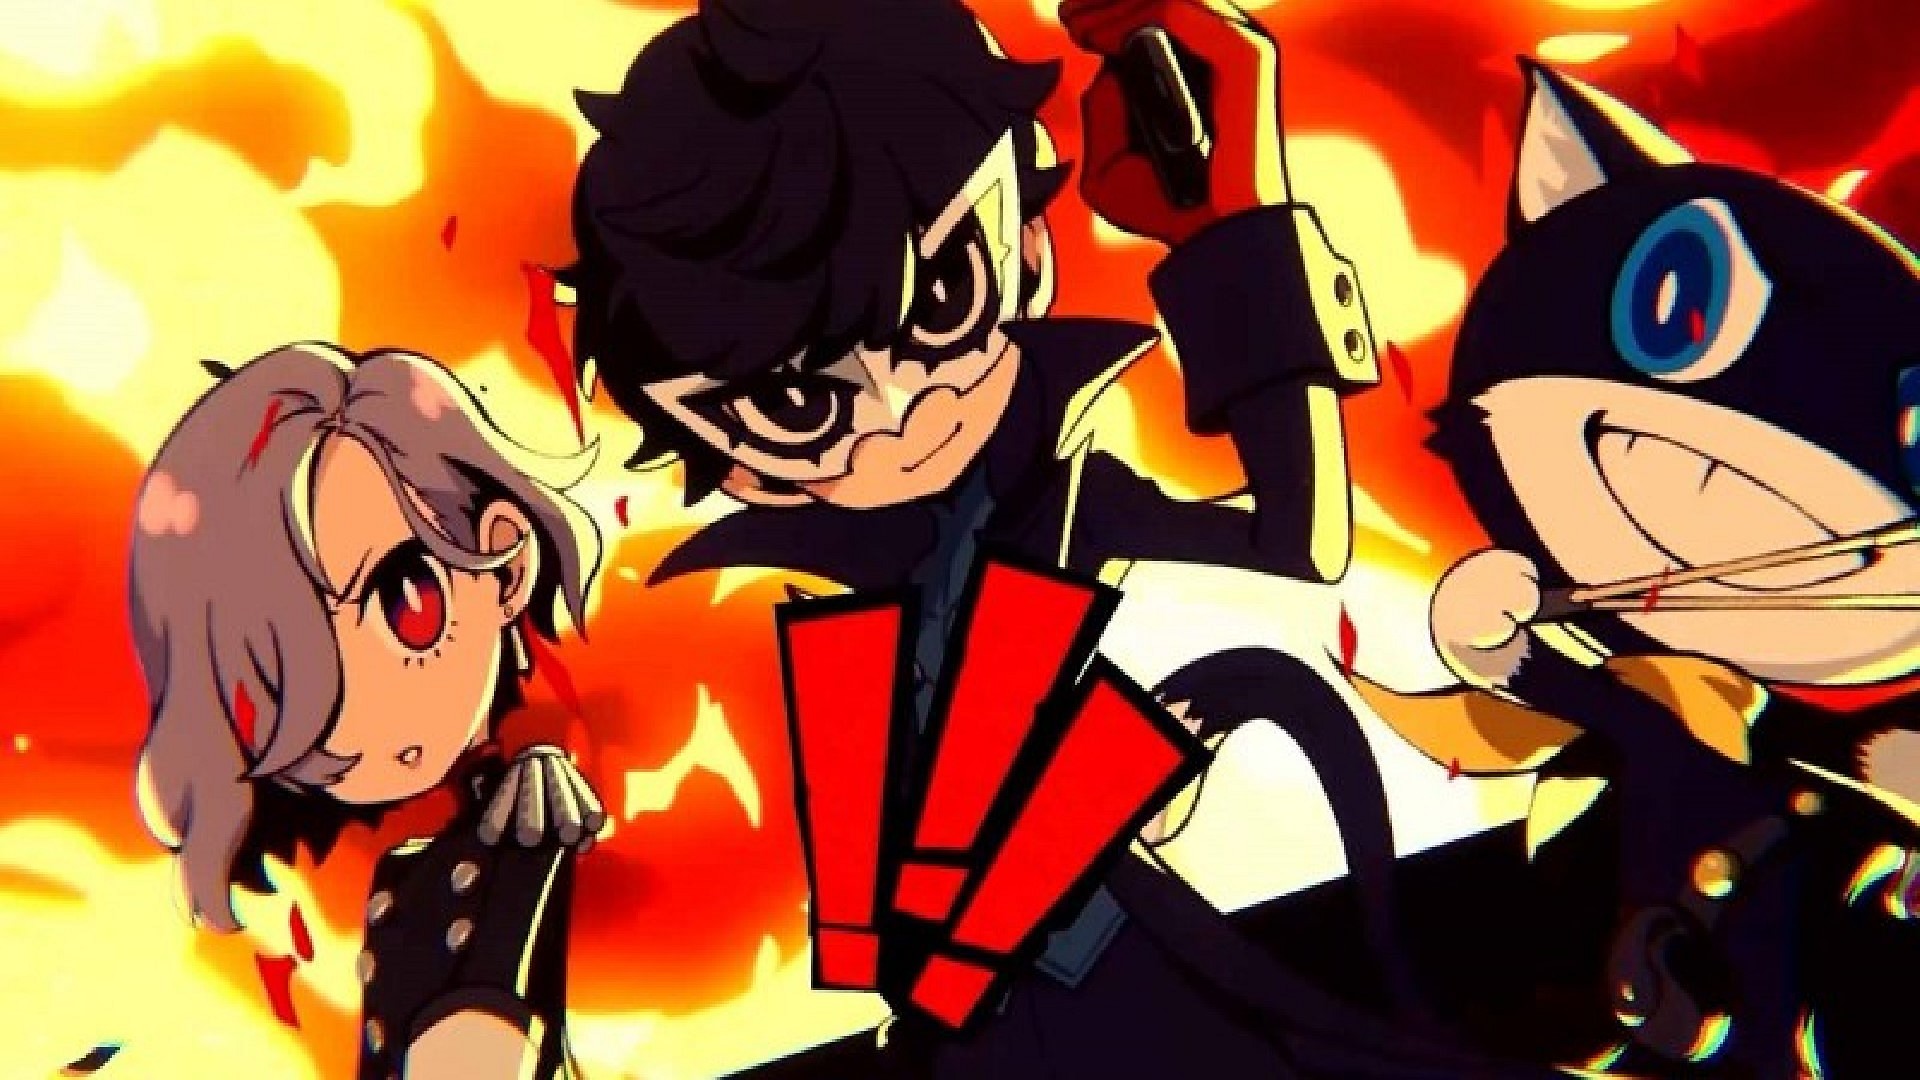 Persona 5 Tactica: How To Make Money Fast